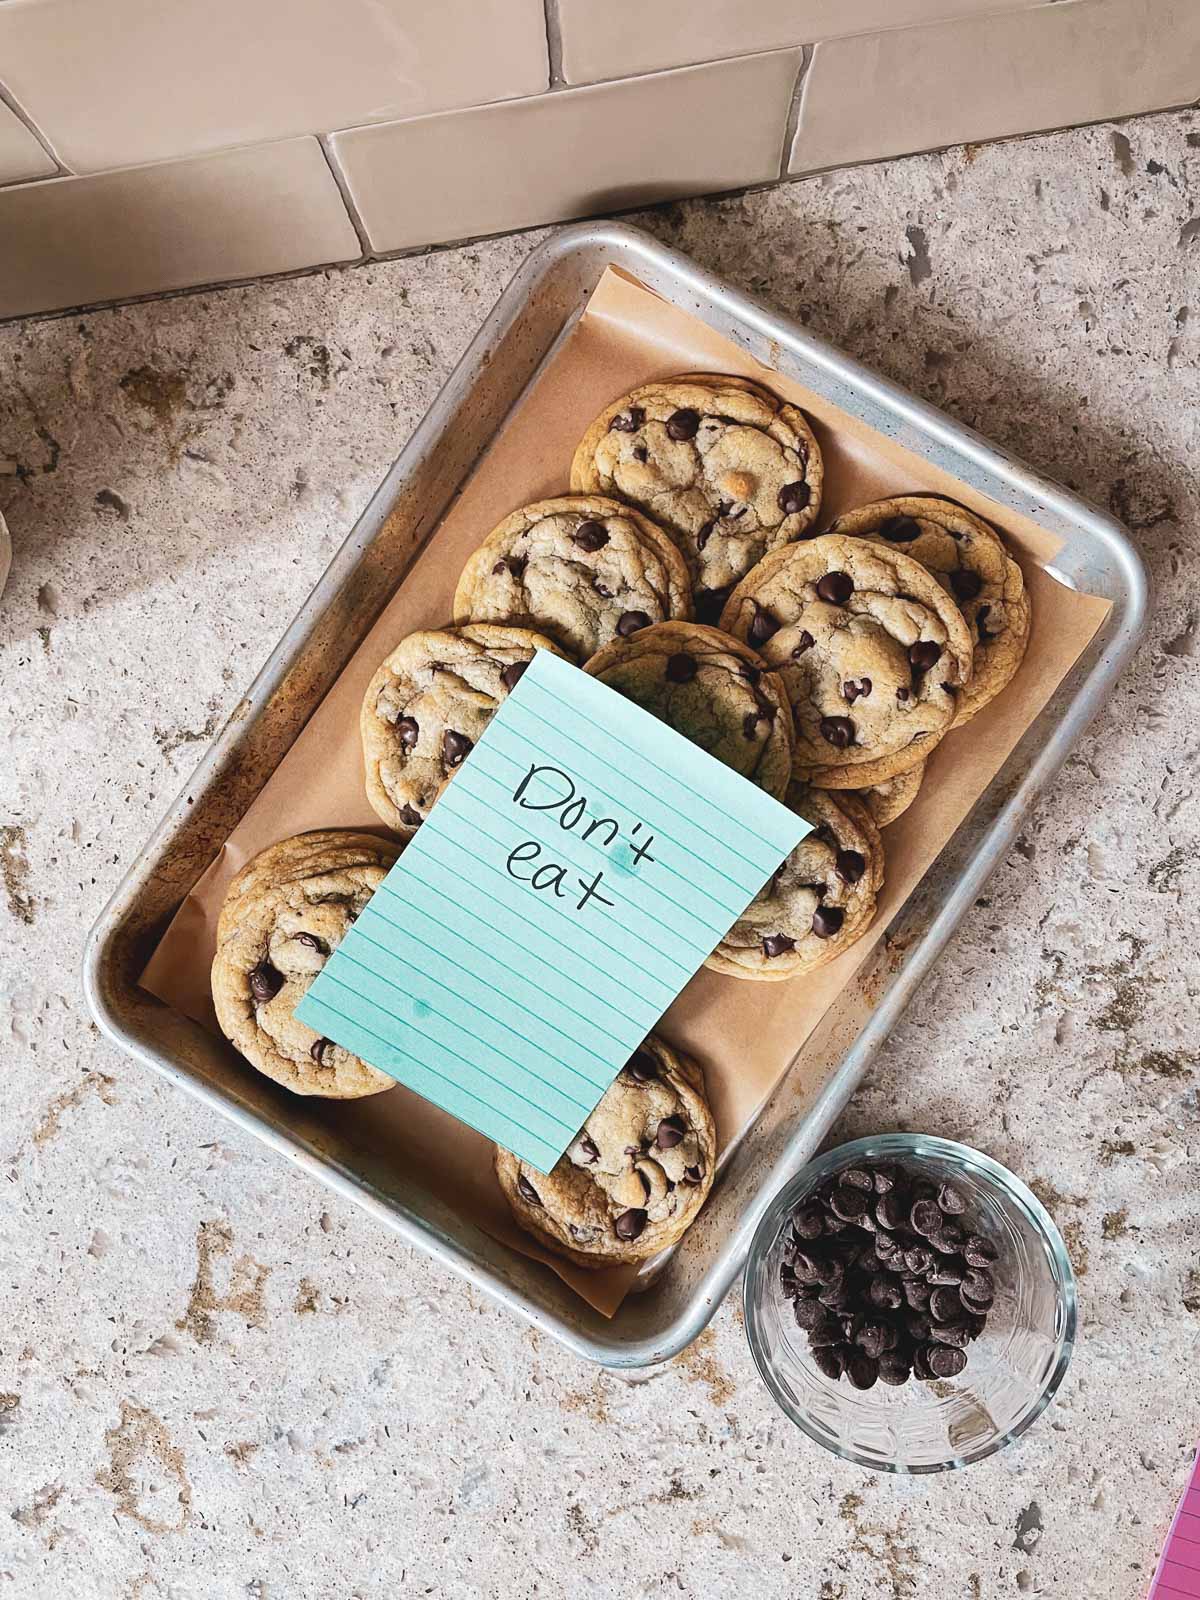 chocolate chip cookies on small baking sheet with "don't eat" note on top.